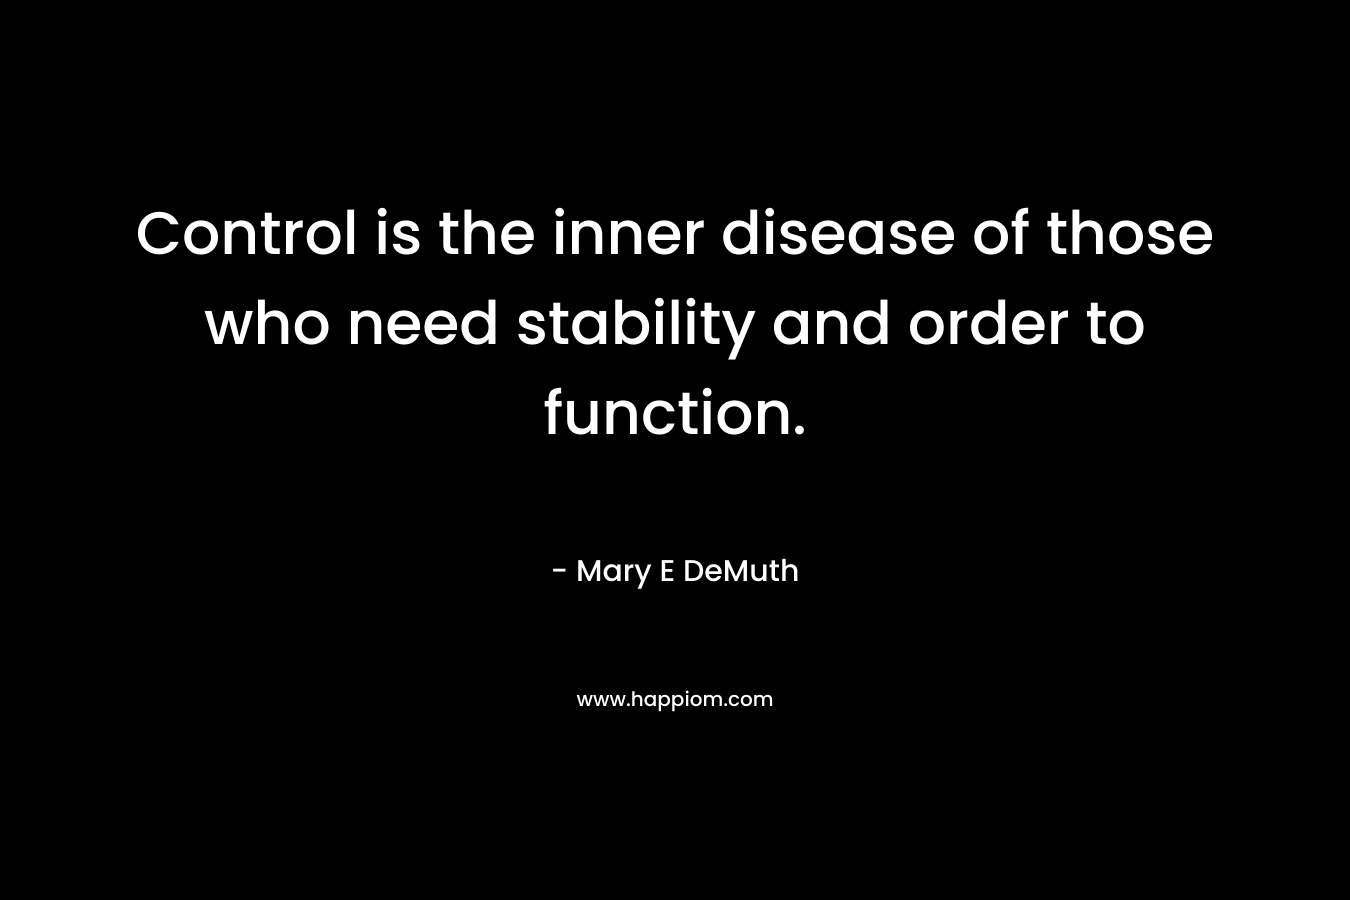 Control is the inner disease of those who need stability and order to function. – Mary E DeMuth